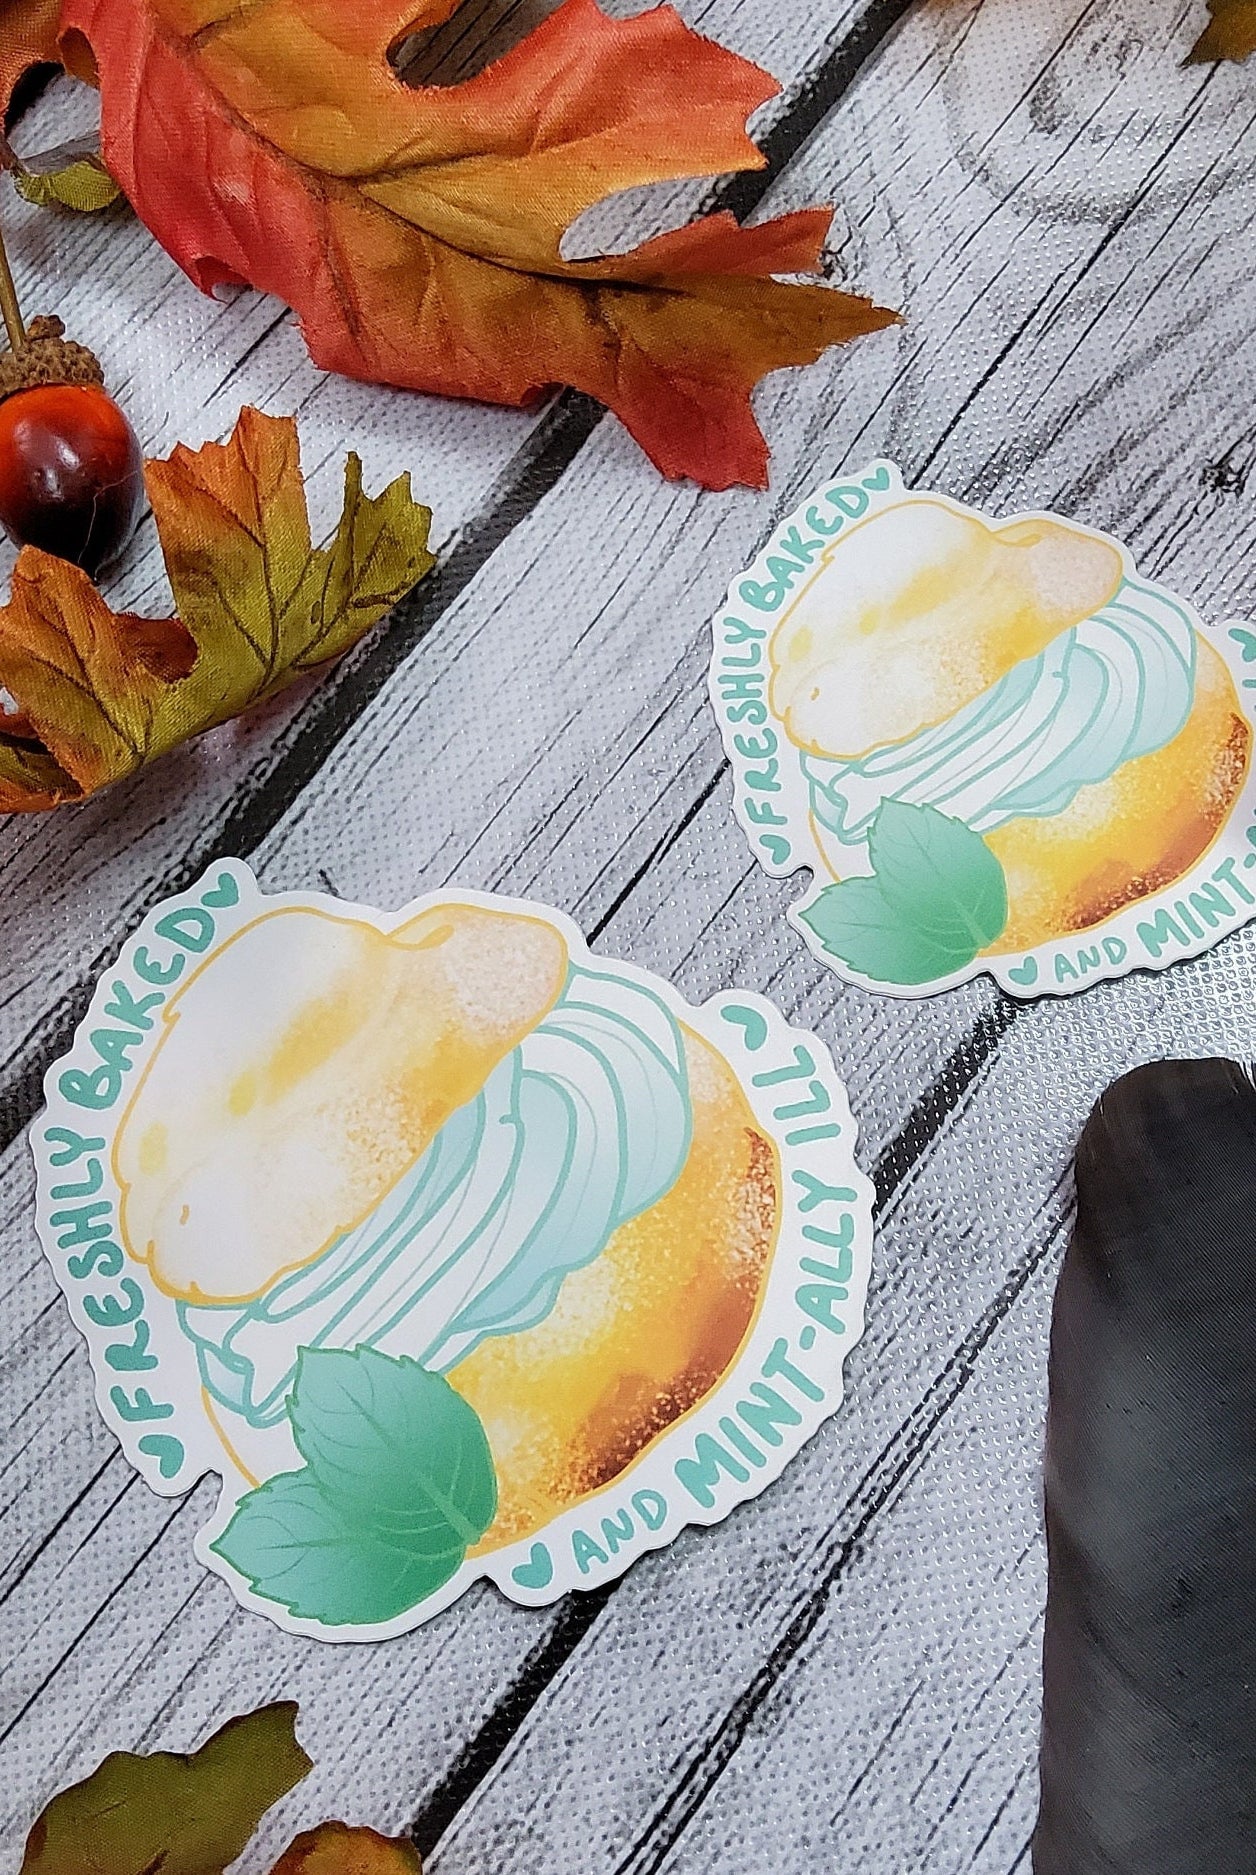 MATTE STICKER: Freshly Baked and Mint-ally Ill Creampuff Sticker , Mint-ally Ill Creampuff Sticker , Pastry Sticker , Mint-ally Ill